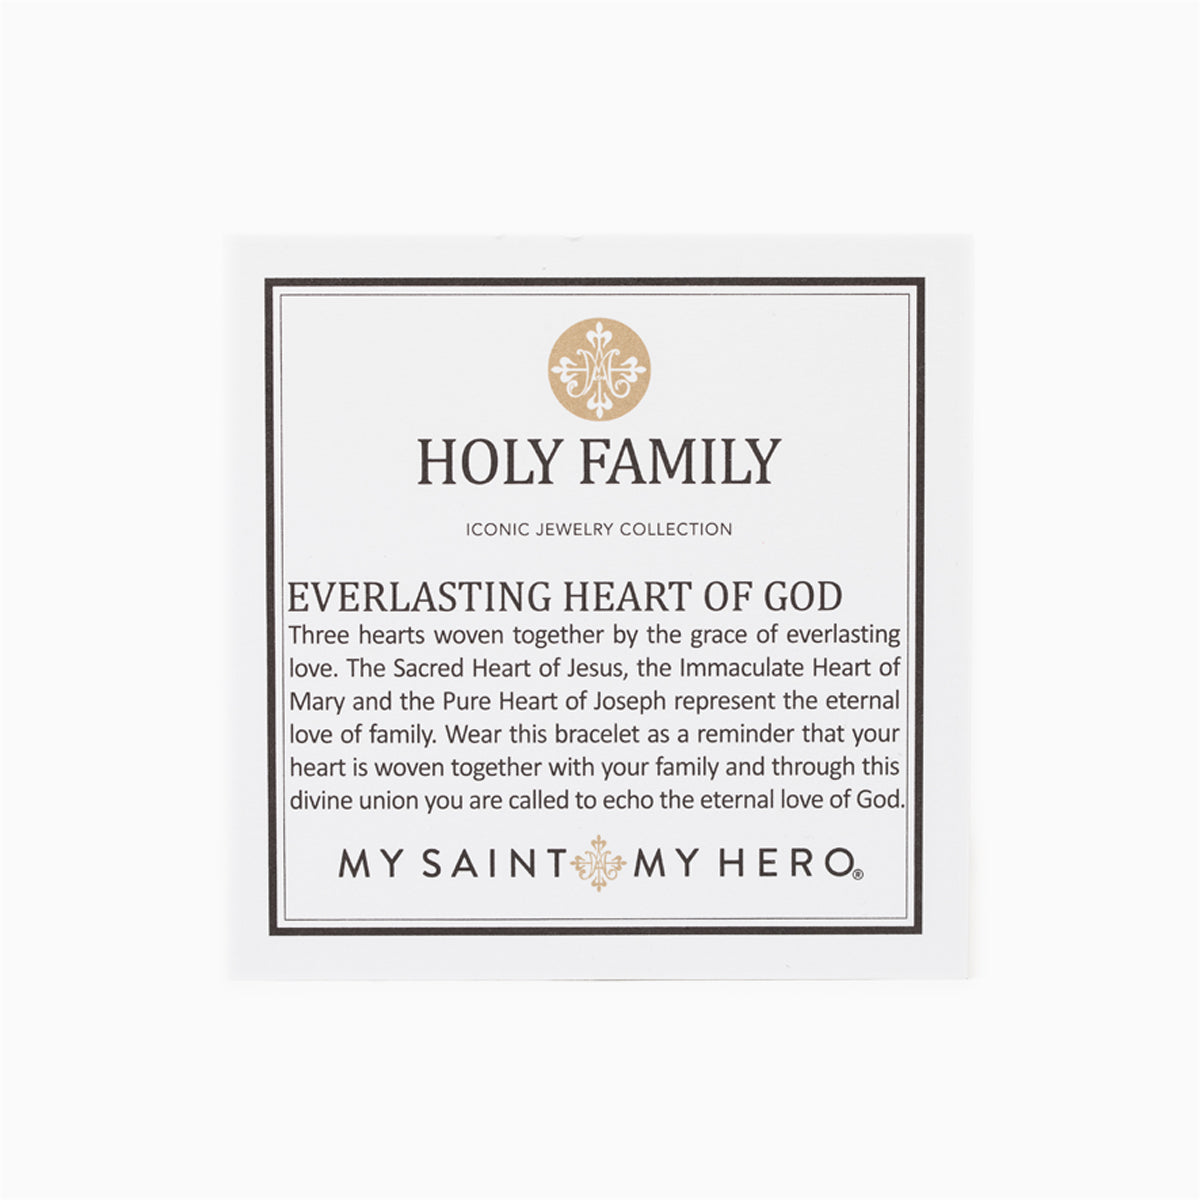 Holy Family Everlasting Heart of God Cuff